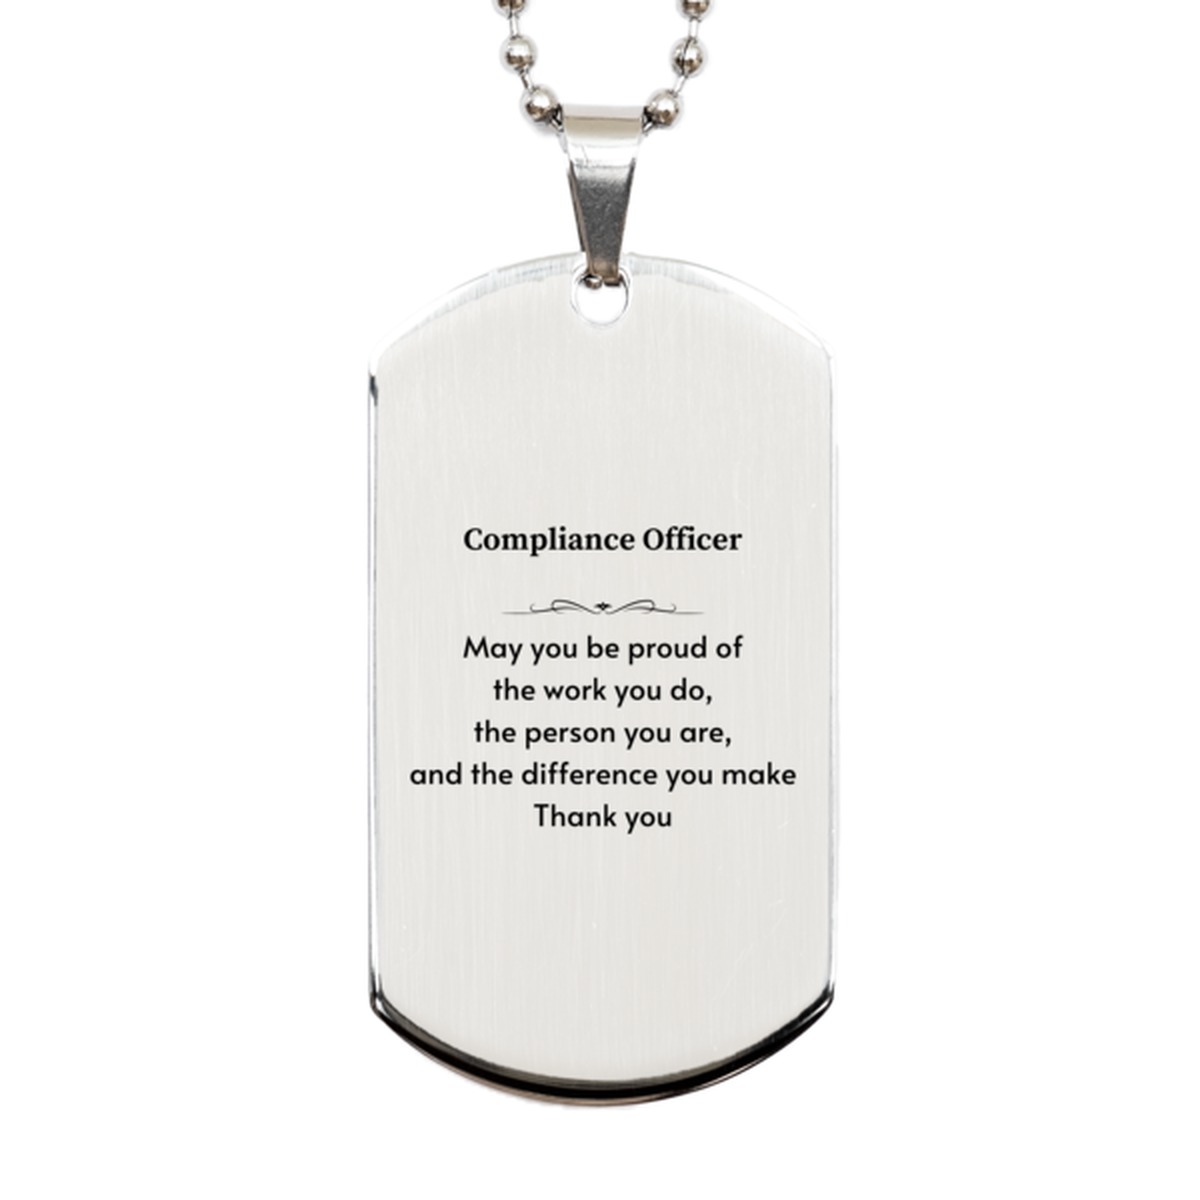 Heartwarming Silver Dog Tag Retirement Coworkers Gifts for Compliance Officer, Compliance Officer May You be proud of the work you do, the person you are Gifts for Boss Men Women Friends